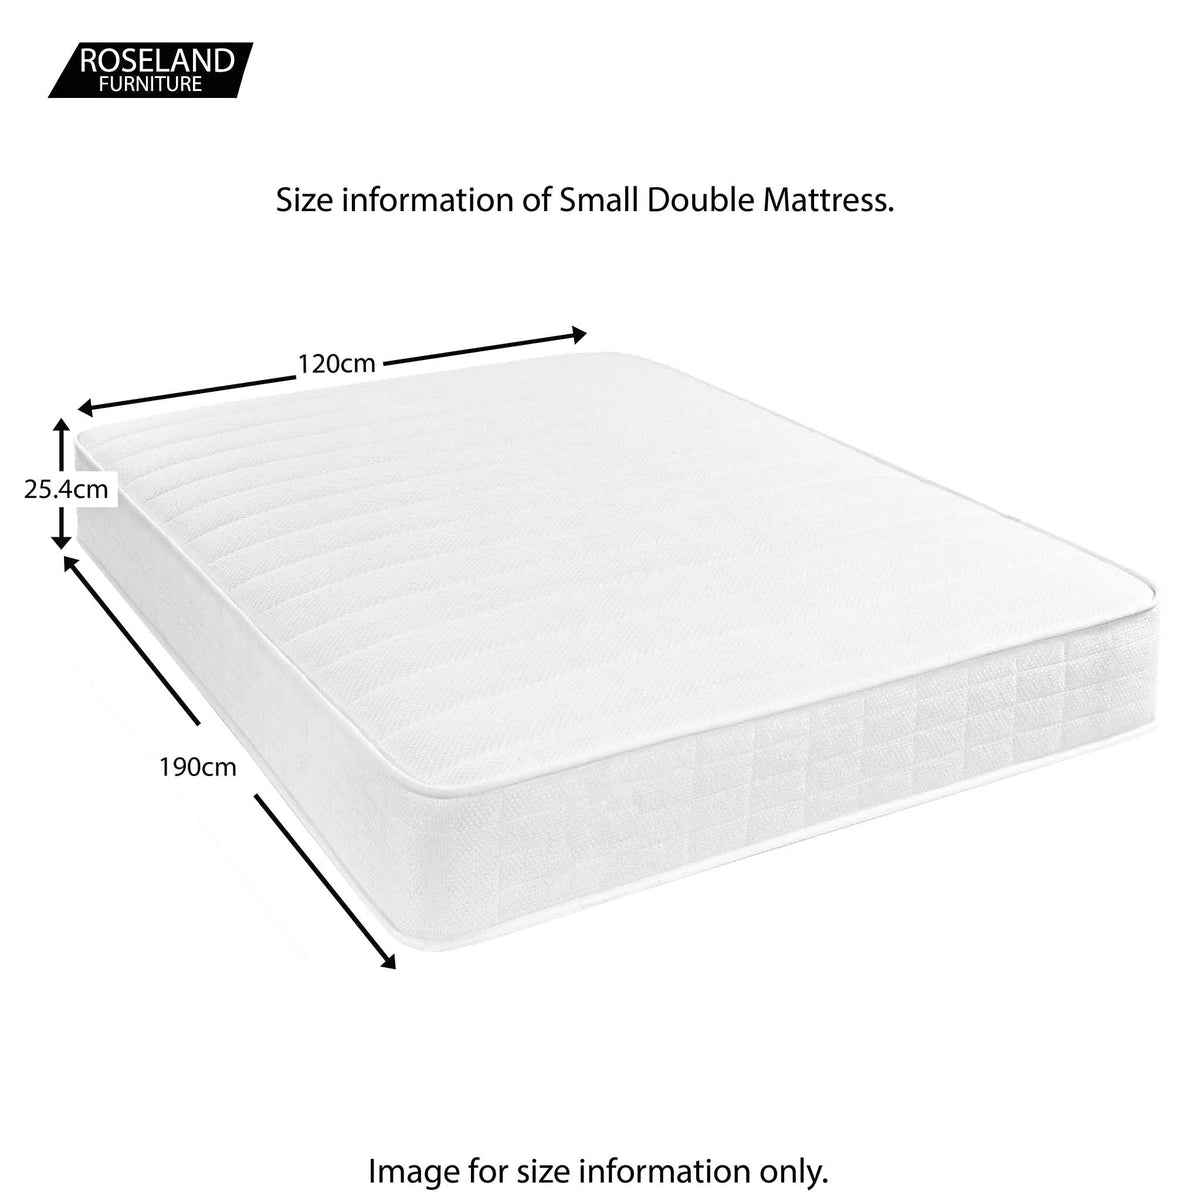 Roseland Sleep Bella - Small Double Size Guide